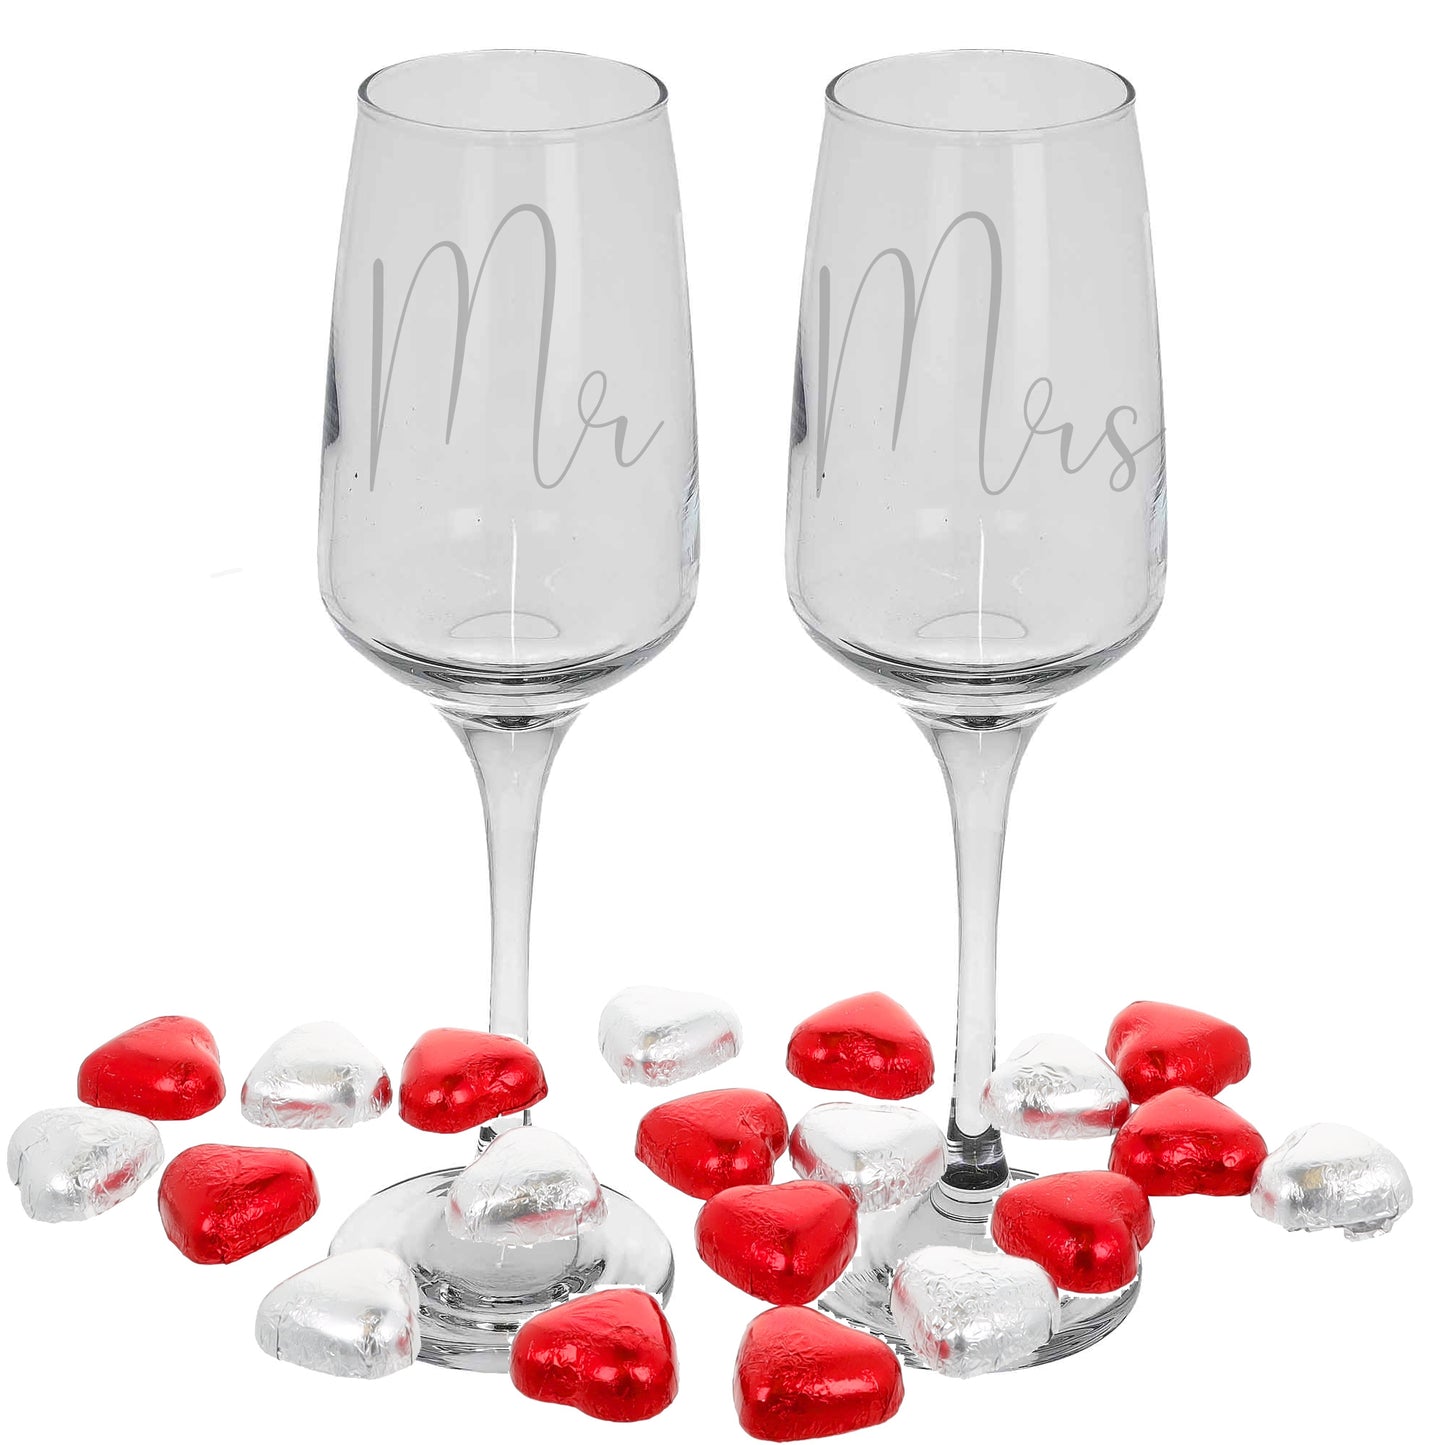 Create Your Own Tallo Personalised Engraved Champagne Flute Set  - Always Looking Good - Chocolate Hearts Filled  